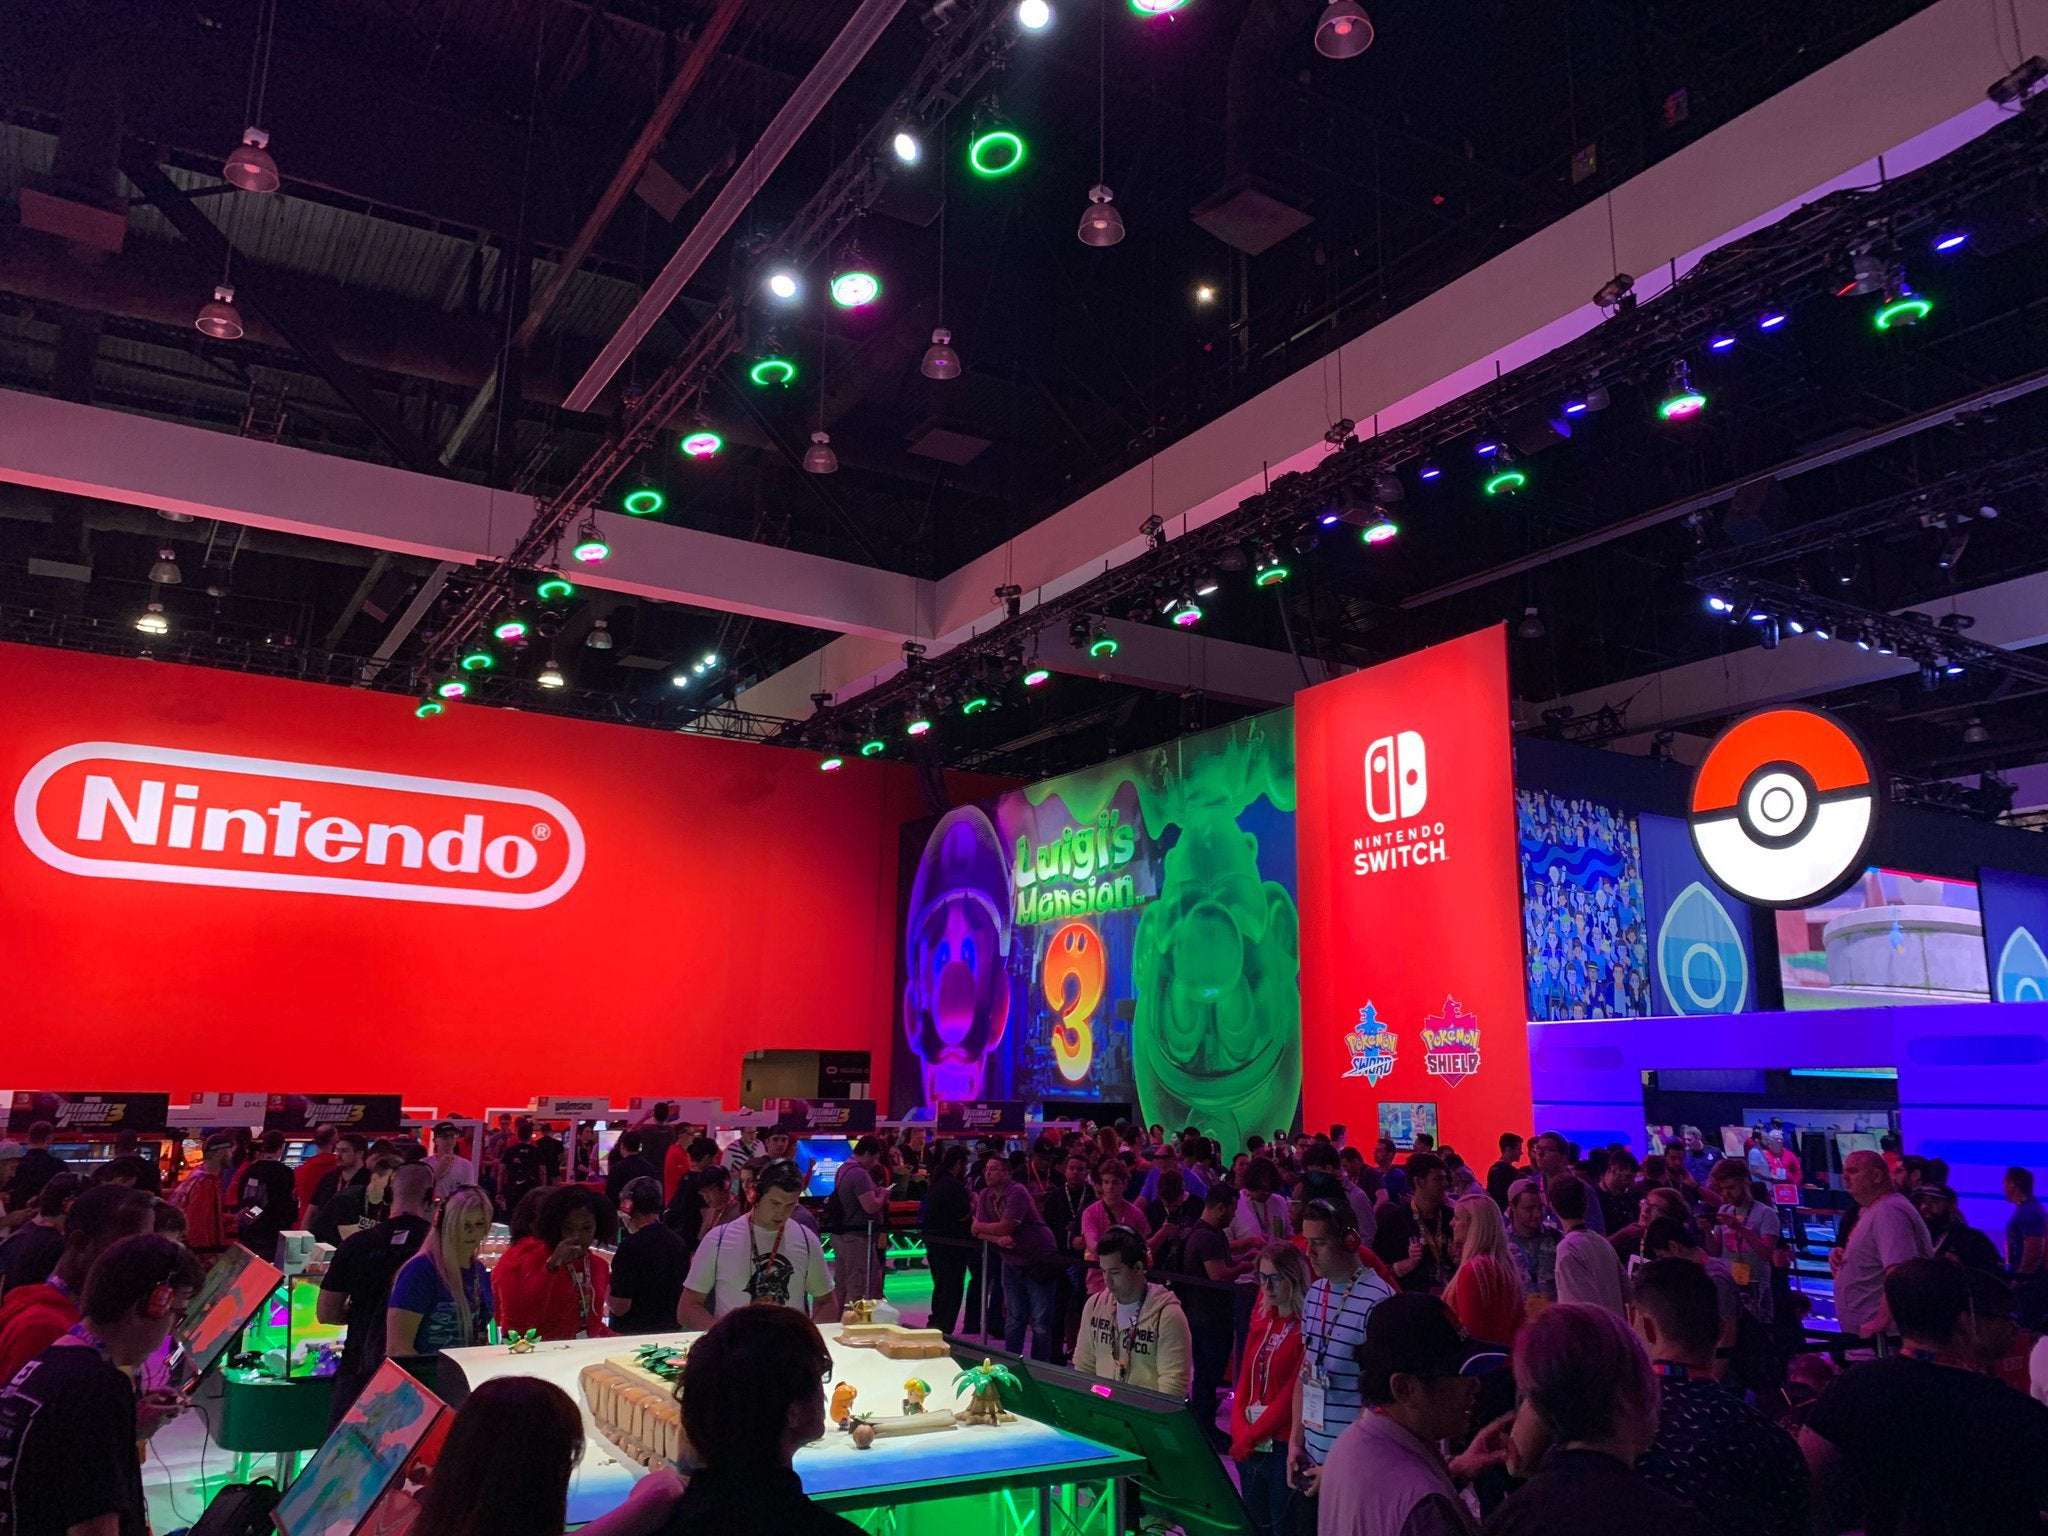 image for Pokémon auf Twitter: "It's the final day of #E32019, but we aren't slowing down yet! Follow #PokemonE3 for all the action from day 3!… "